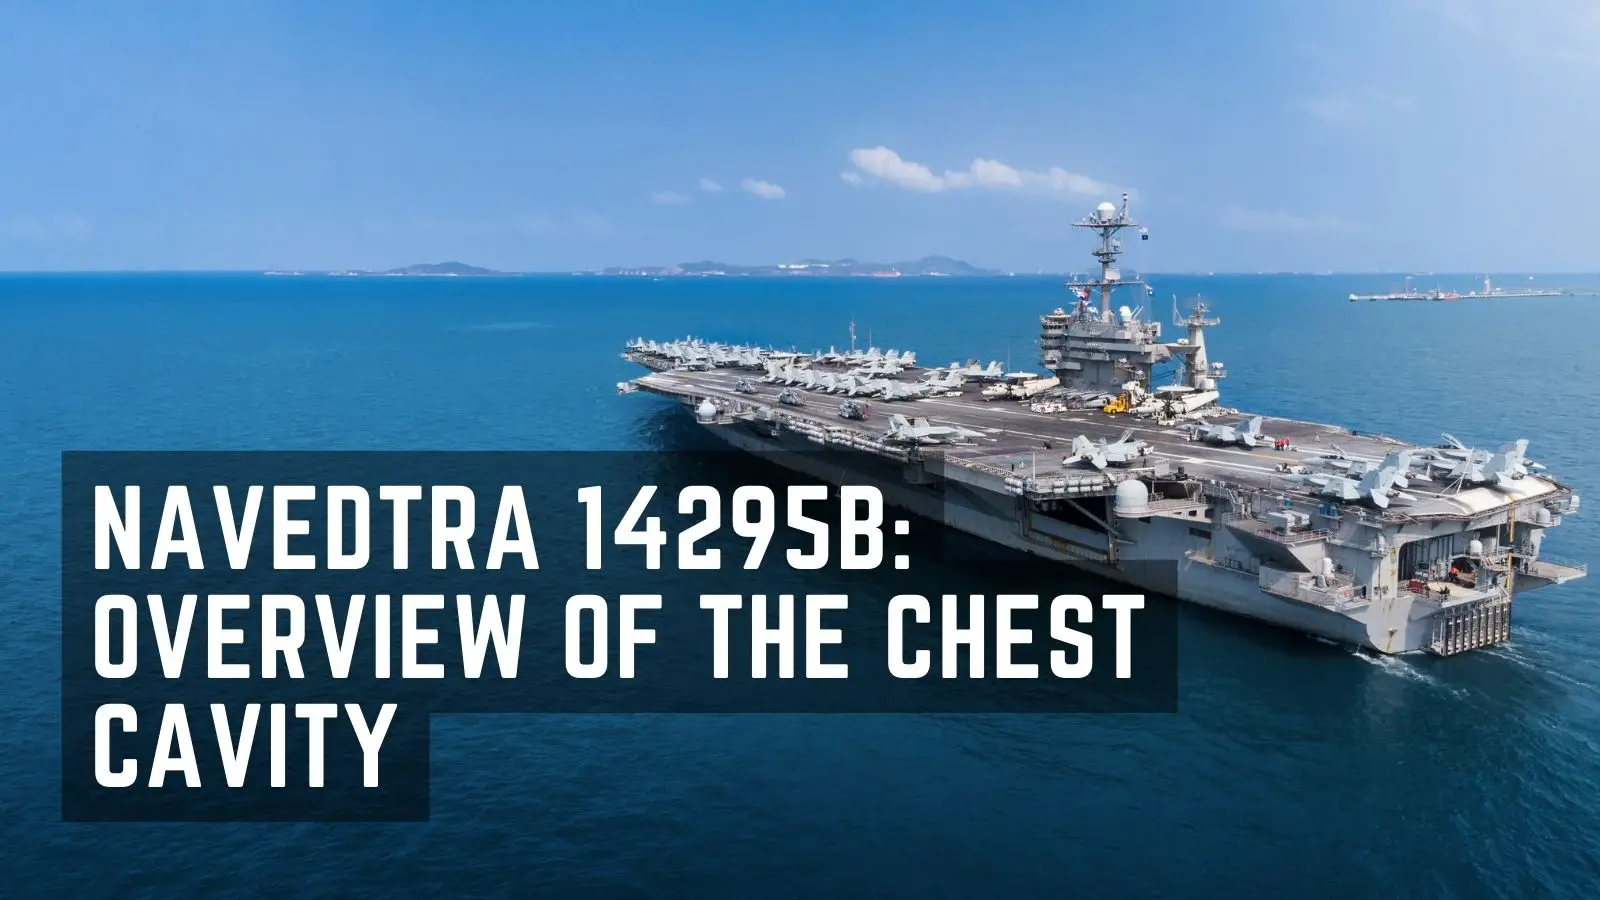 Navedtra 14295B overview of the chest cavity - militaryguidecentral.com